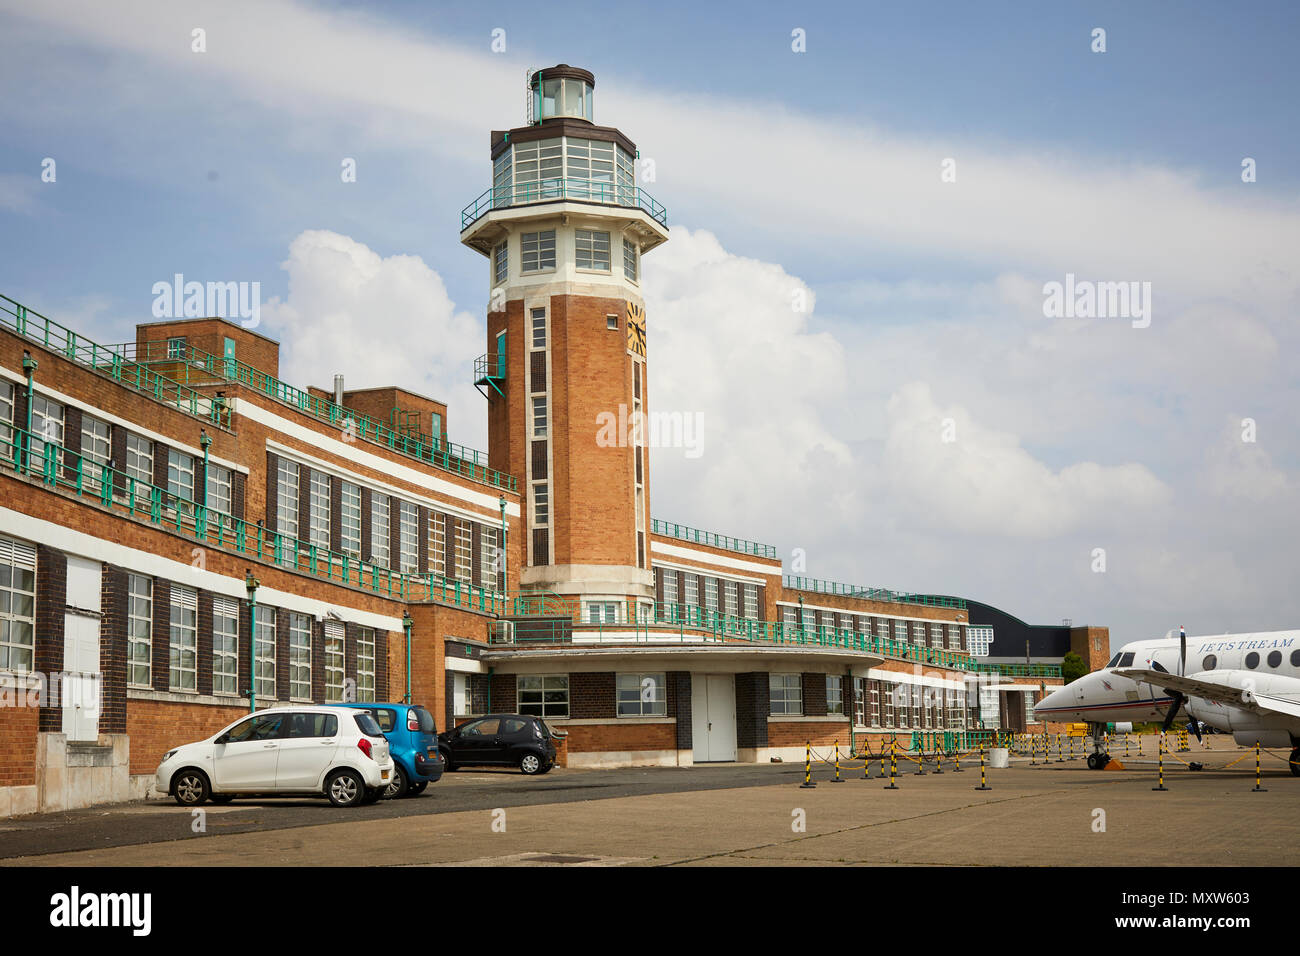 The Crowne Plaza Liverpool John Lennon Airport Hotel, formerly the terminal building of Liverpool Speke Airport, aerodrome art deco control tower Stock Photo